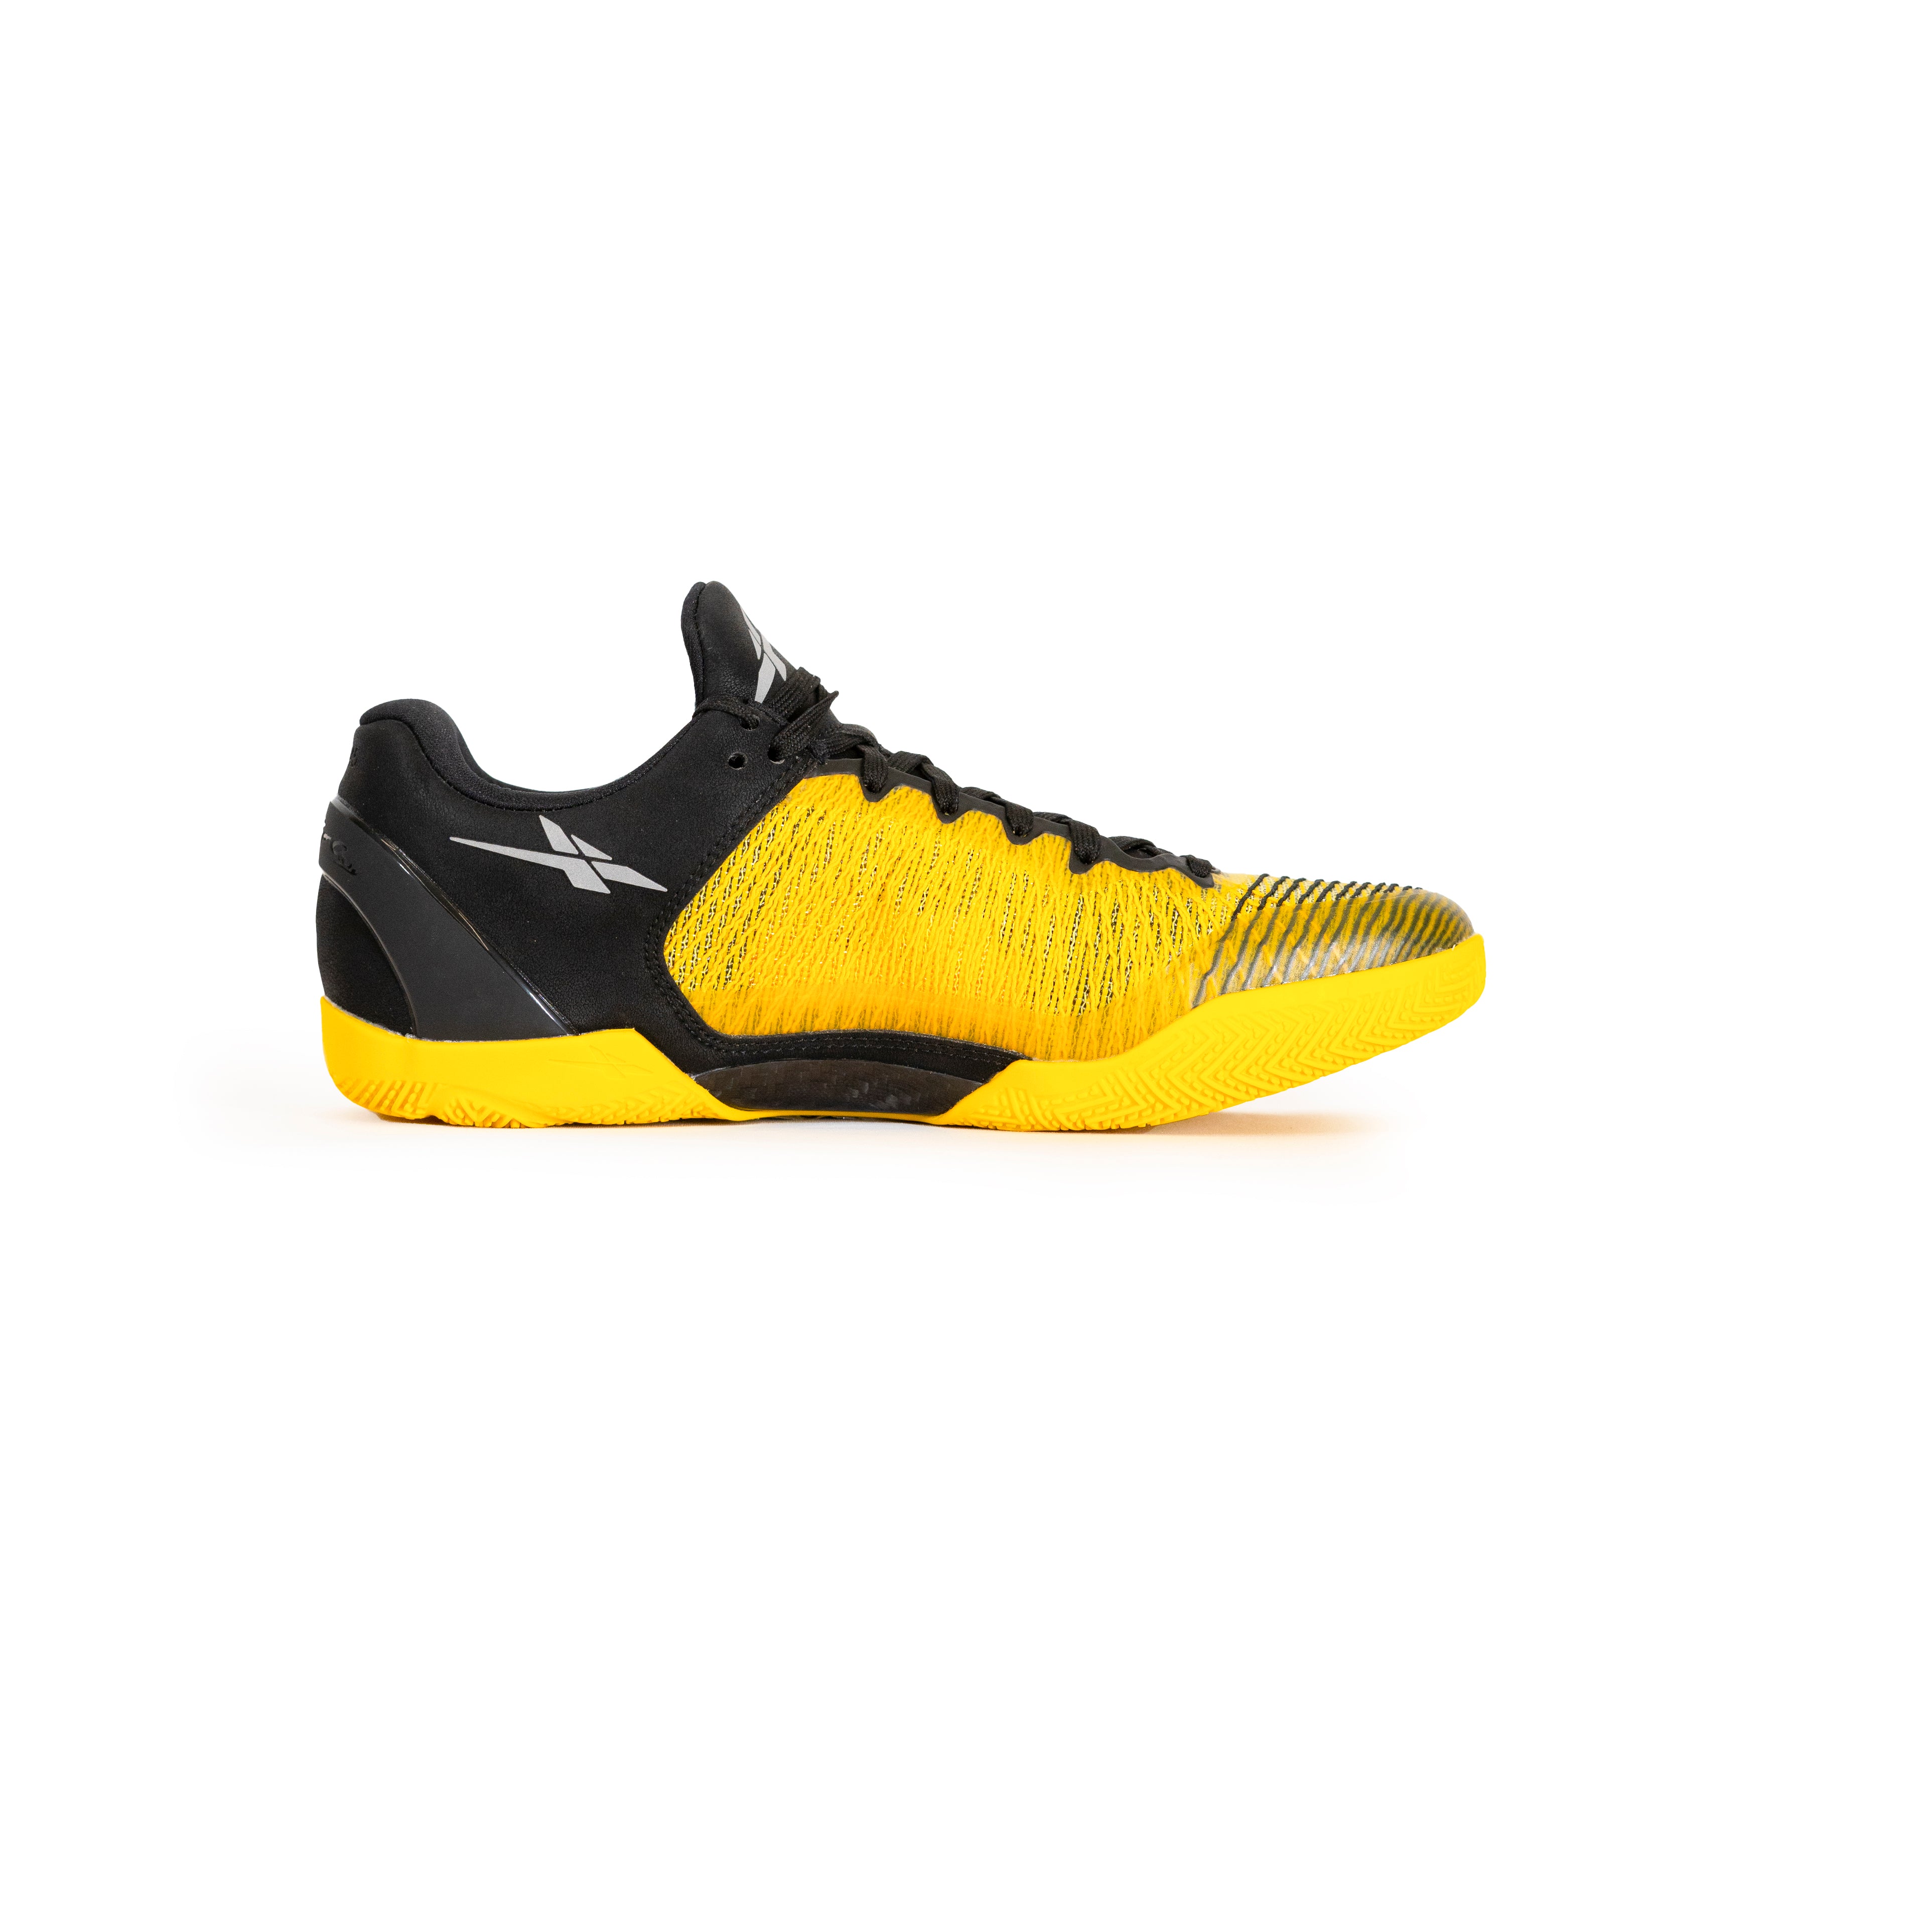 Serious Player Only(Player One Performance Review) #bestbasketballshoe  #basketballshoes #basketball 